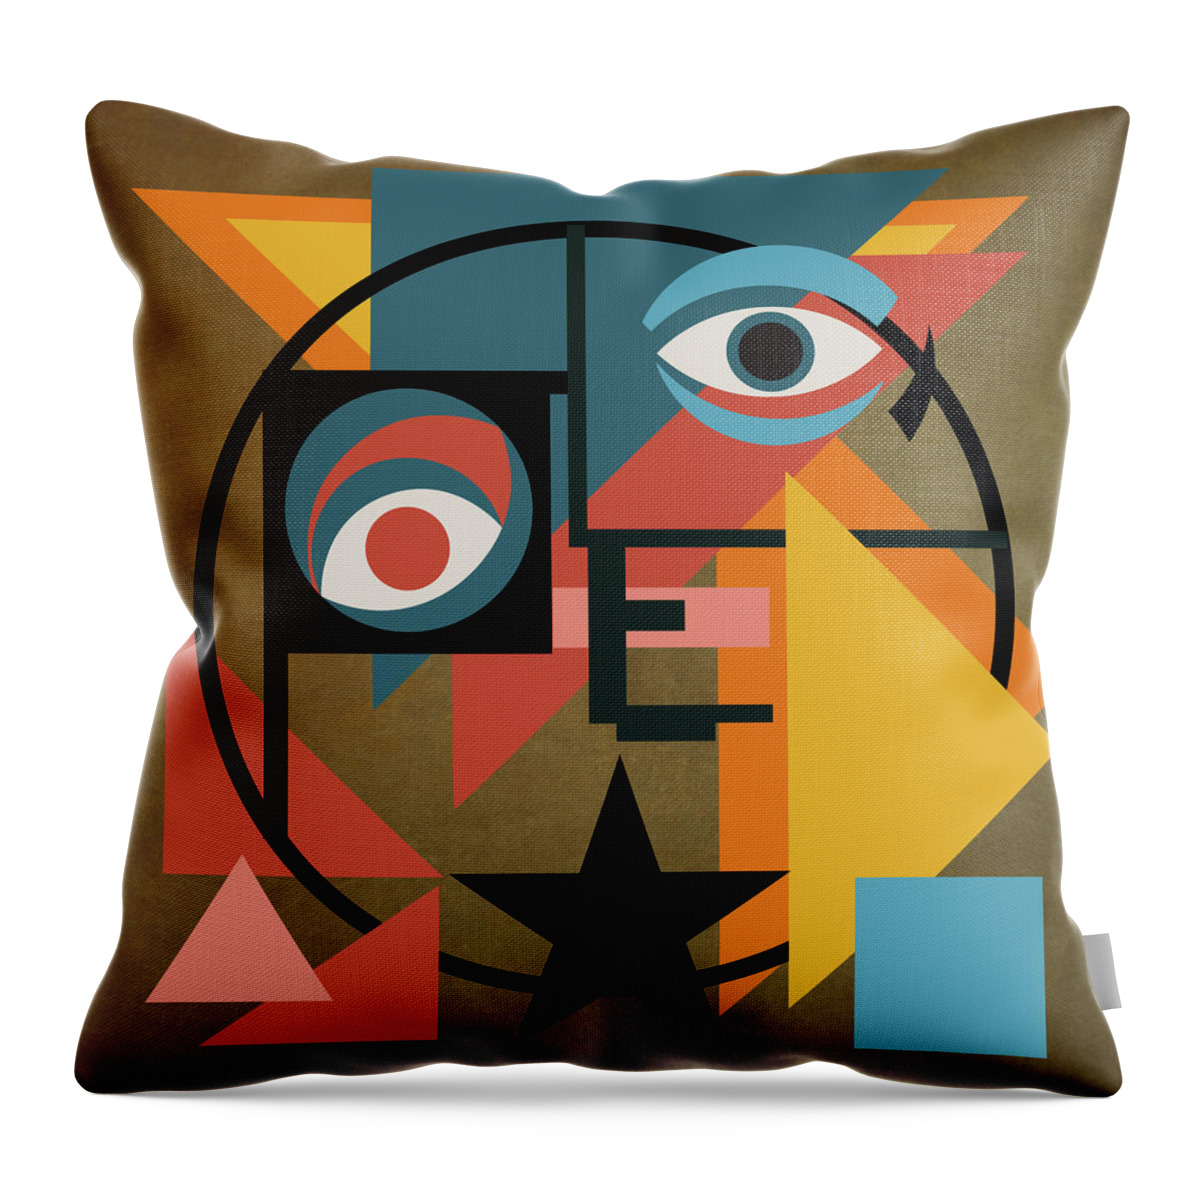 Bowie Throw Pillow featuring the mixed media Bauhaus Pop by BFA Prints